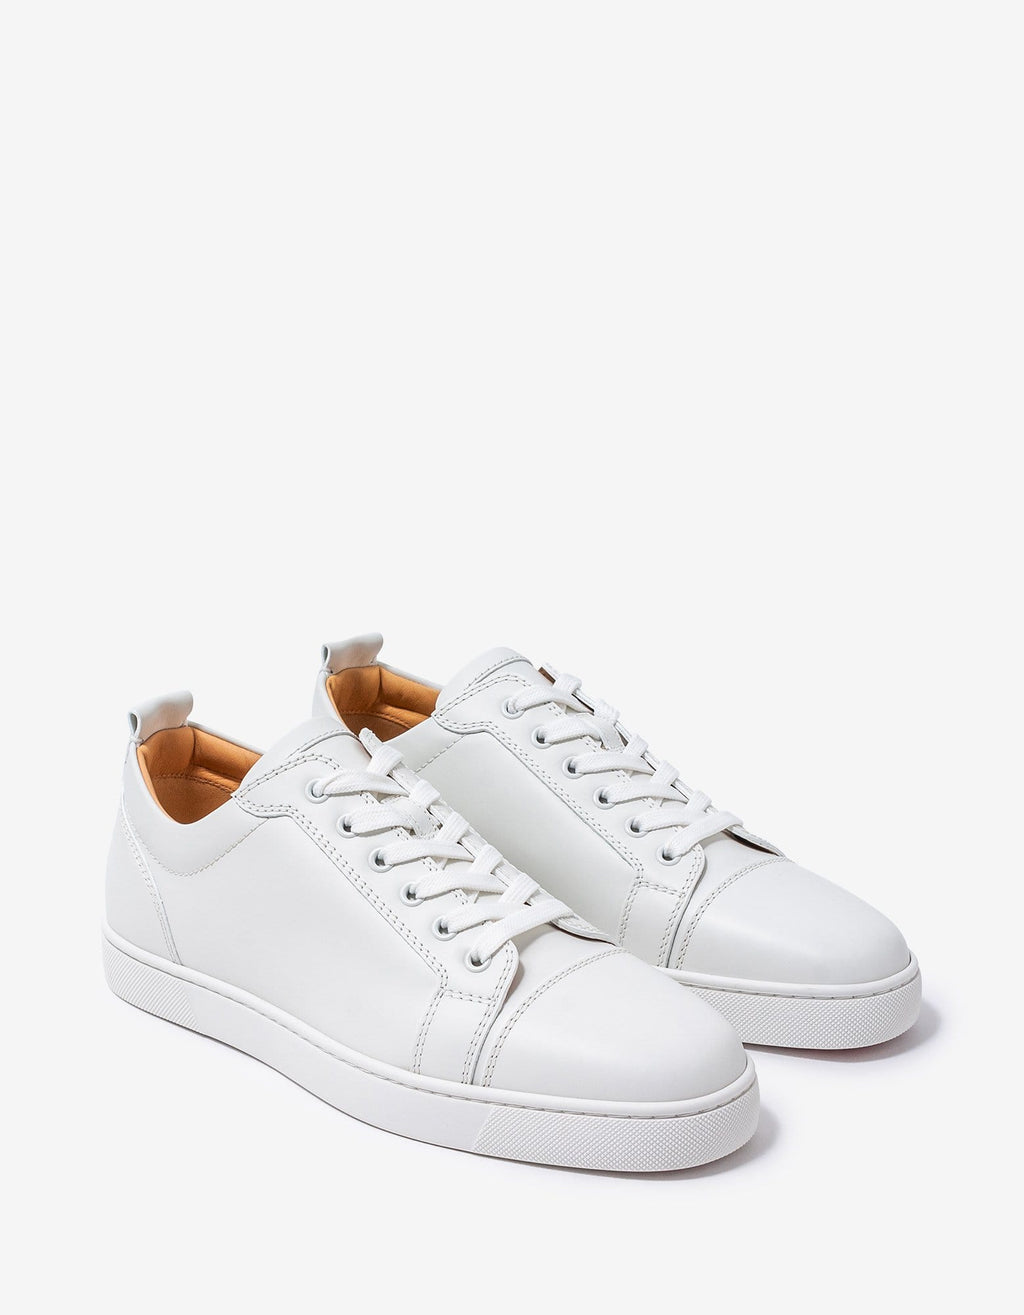 Christian Louboutin Christian Louboutin Louis Junior White Leather Trainers